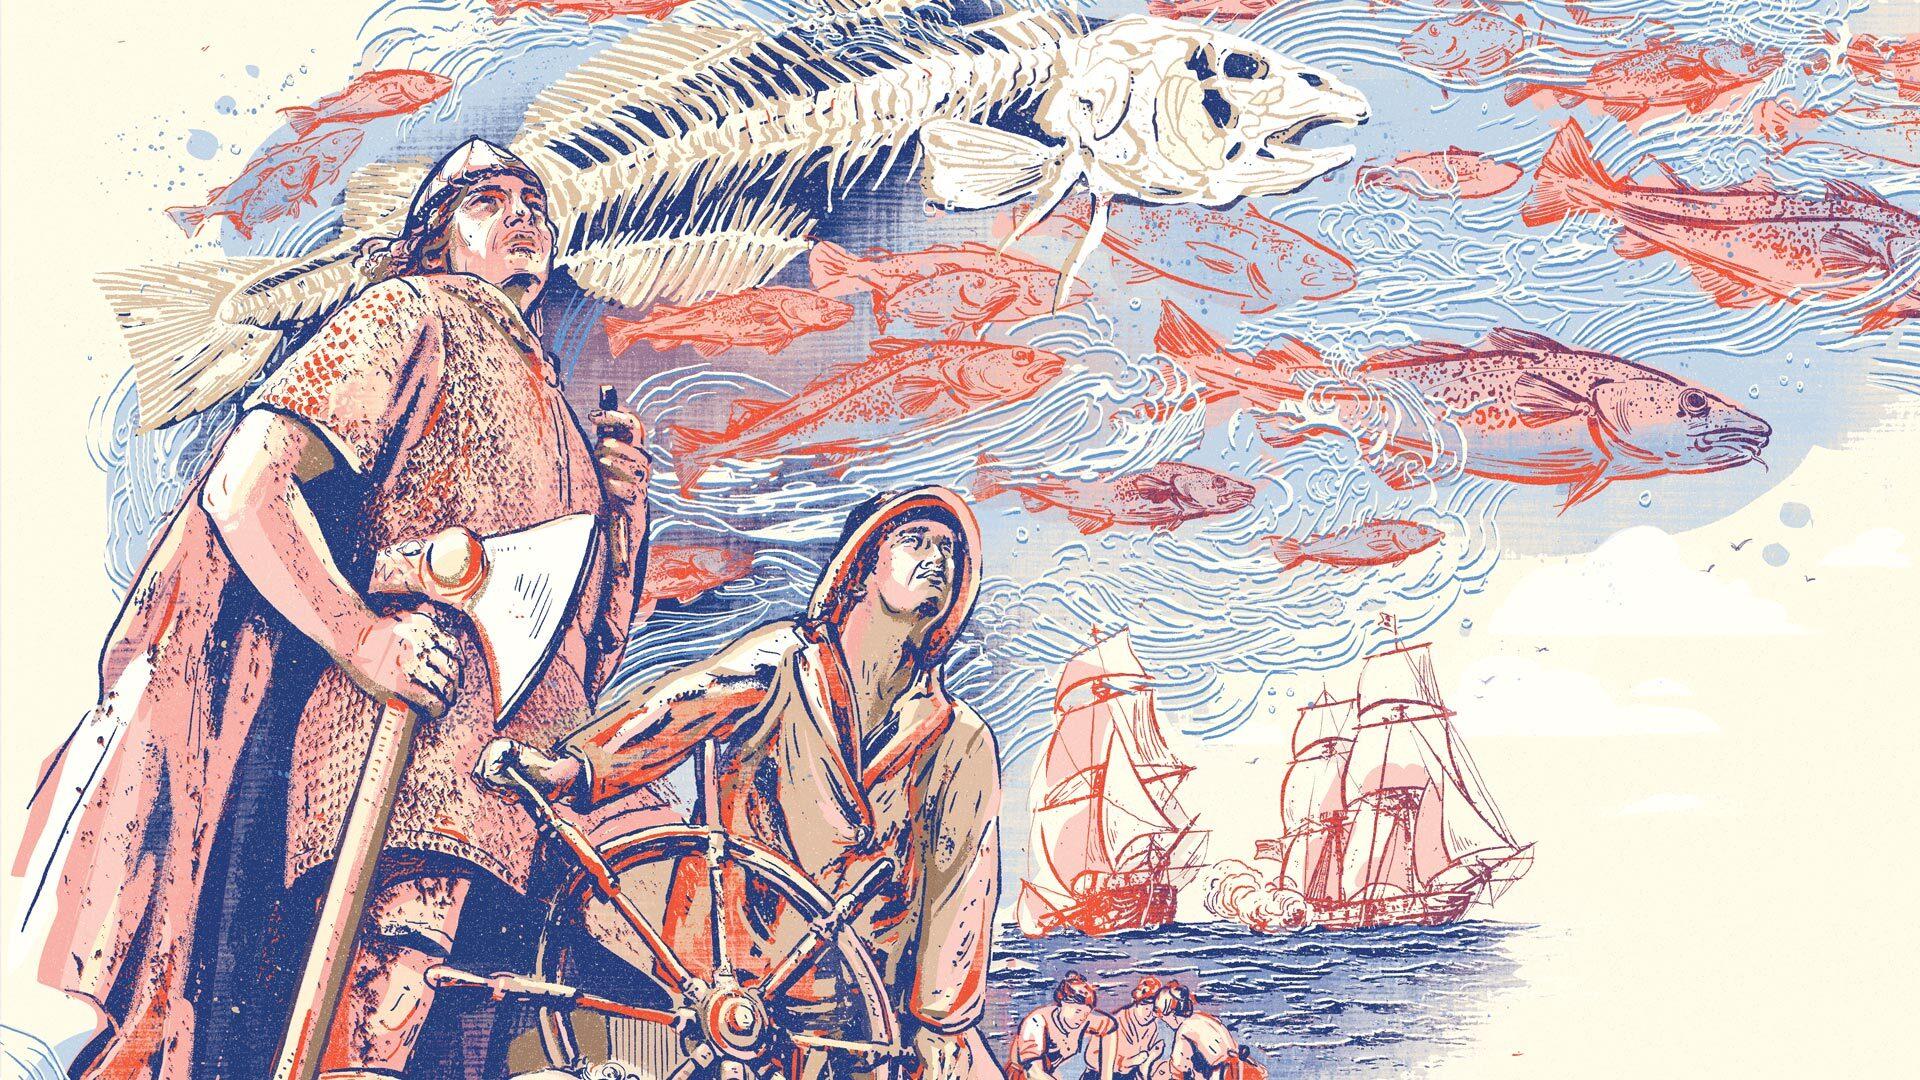 illustration of cod fishing in early 1900s